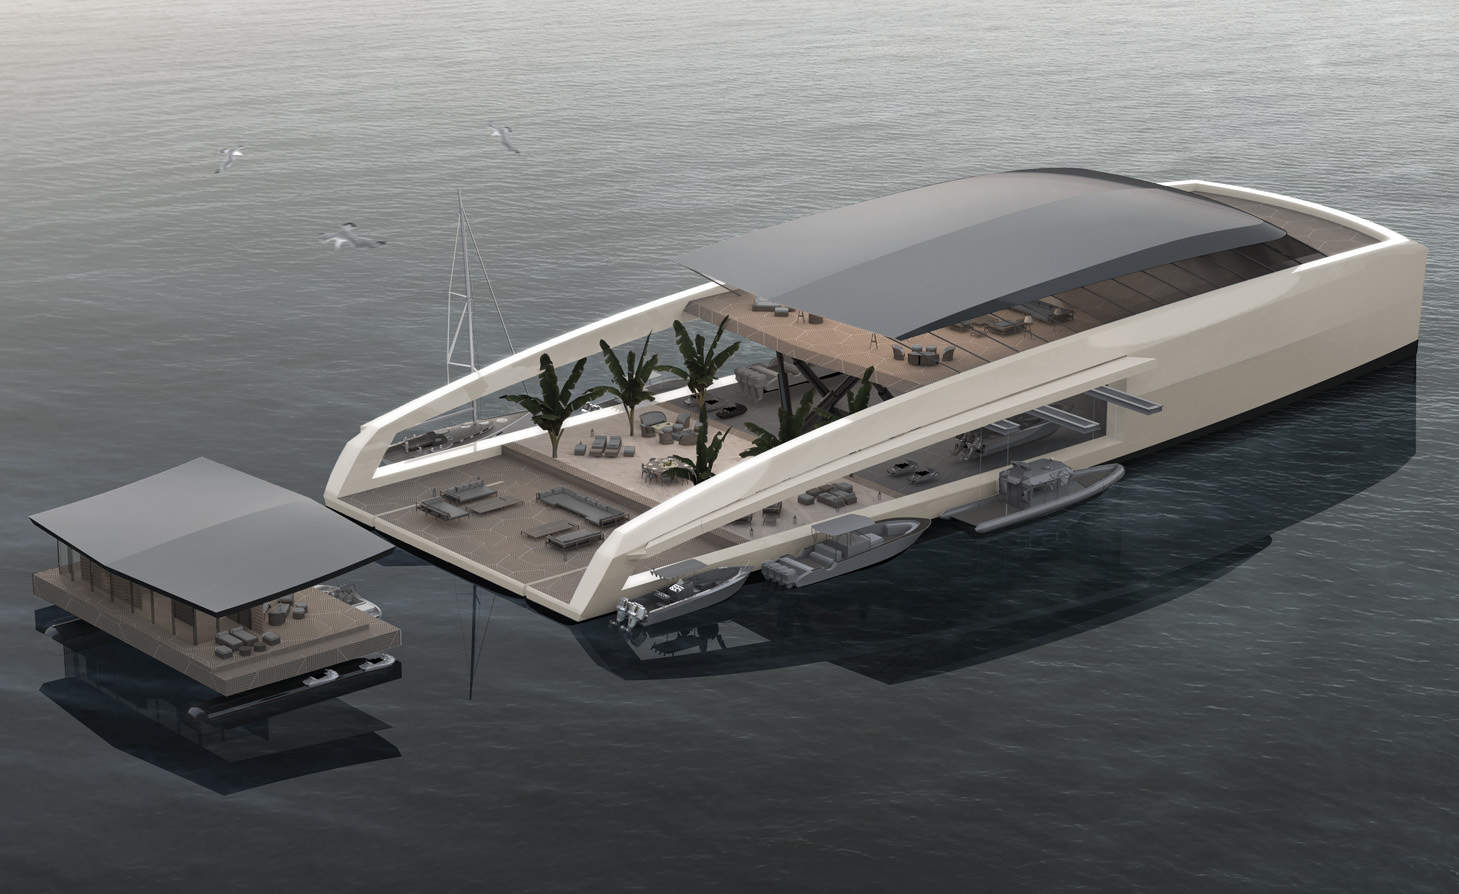 The Remarkable X R-Evolution Yacht Concept by Pastrovich ...